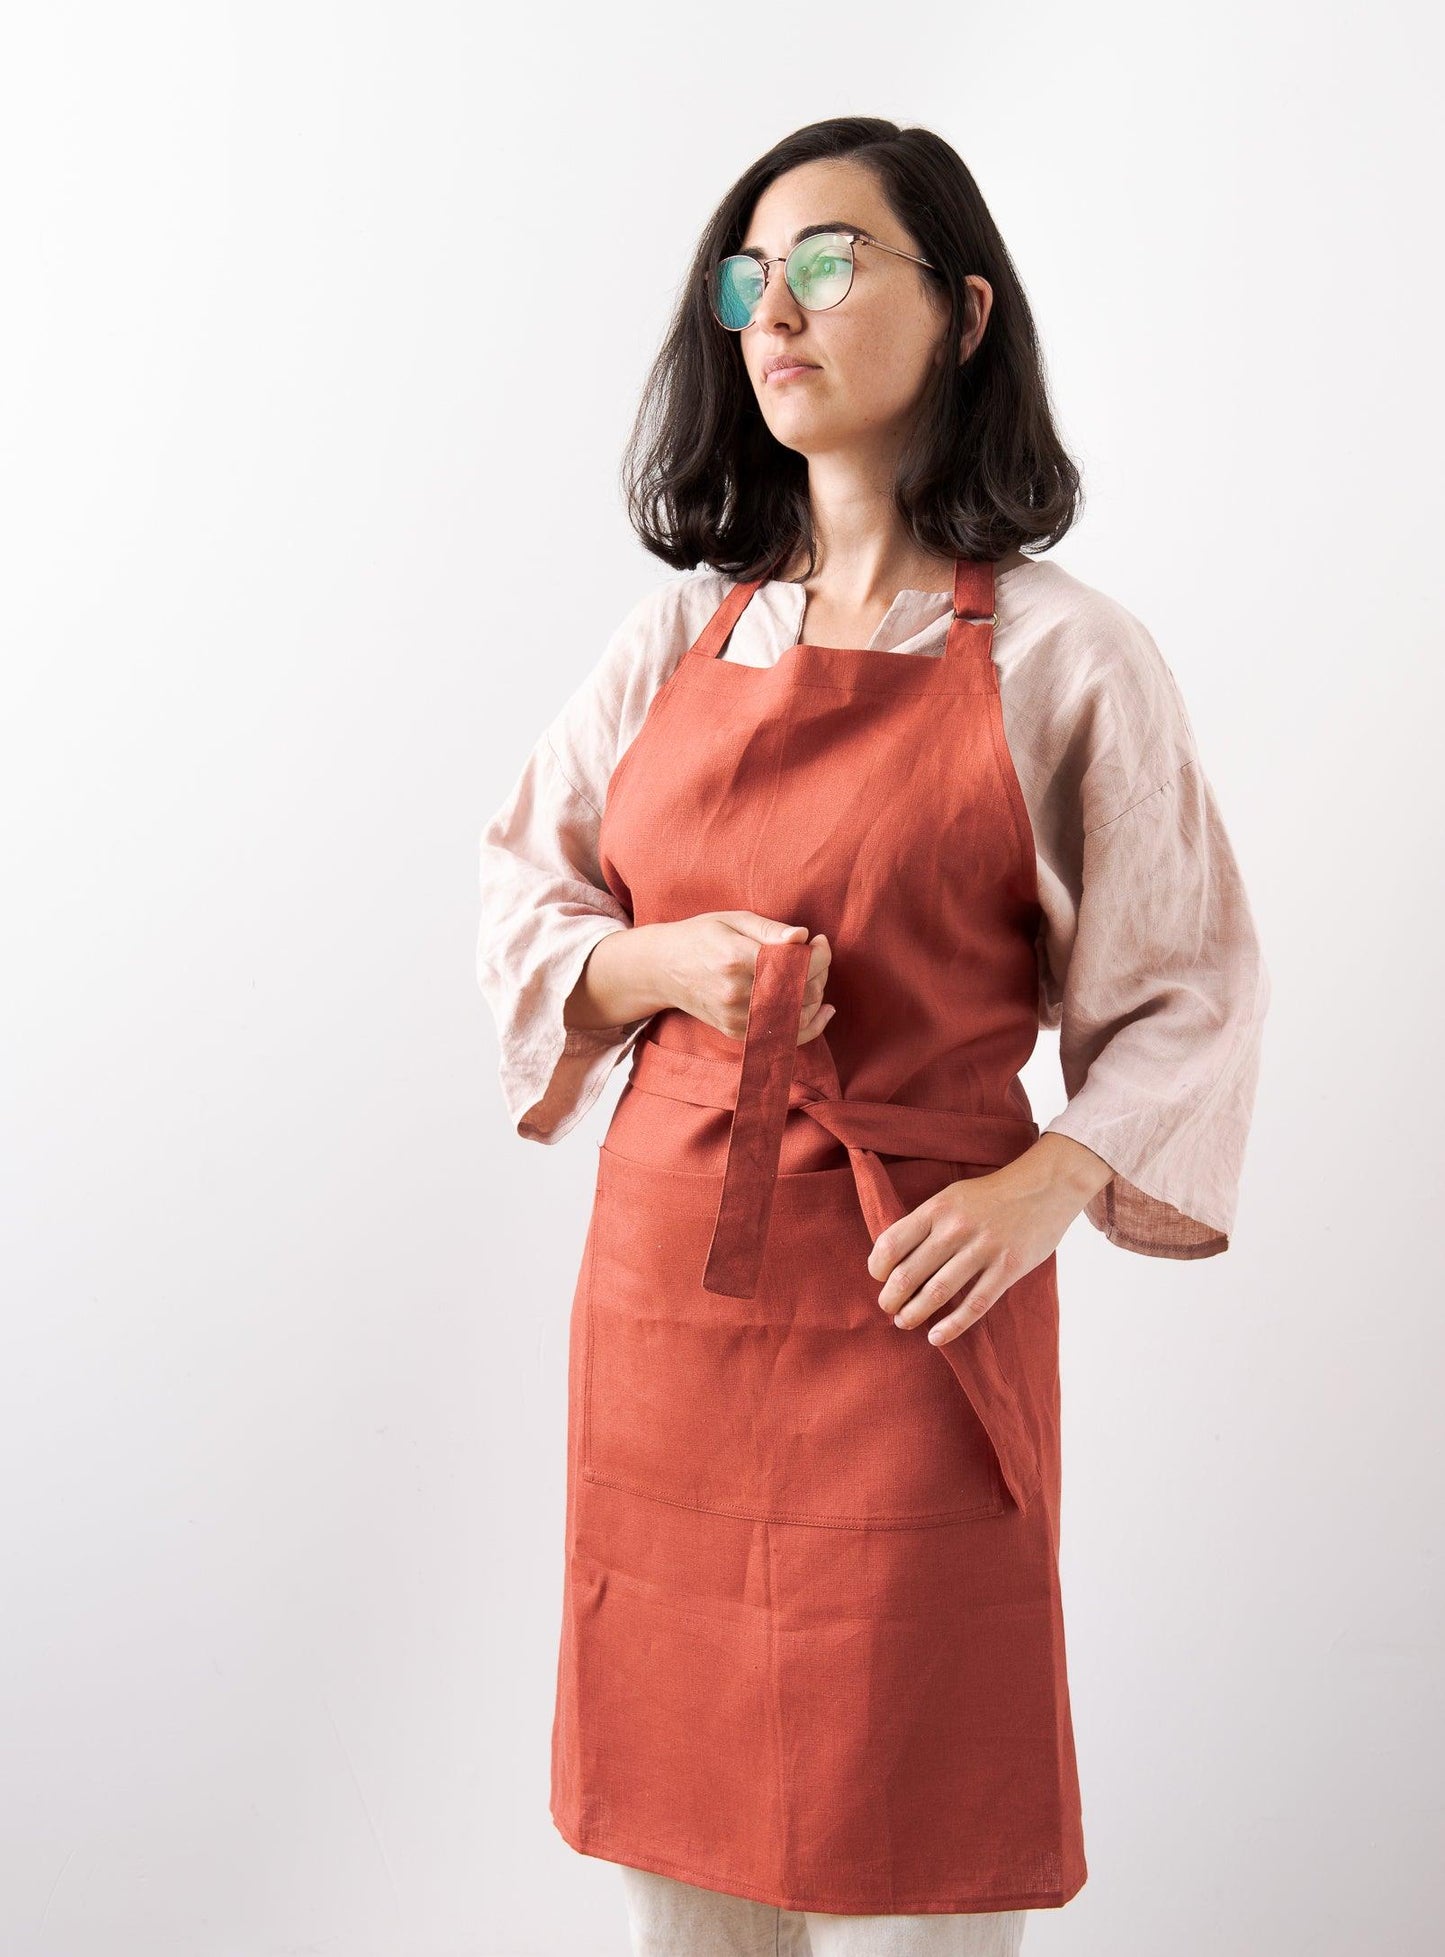 woman with pink linen shirt tying a red apron